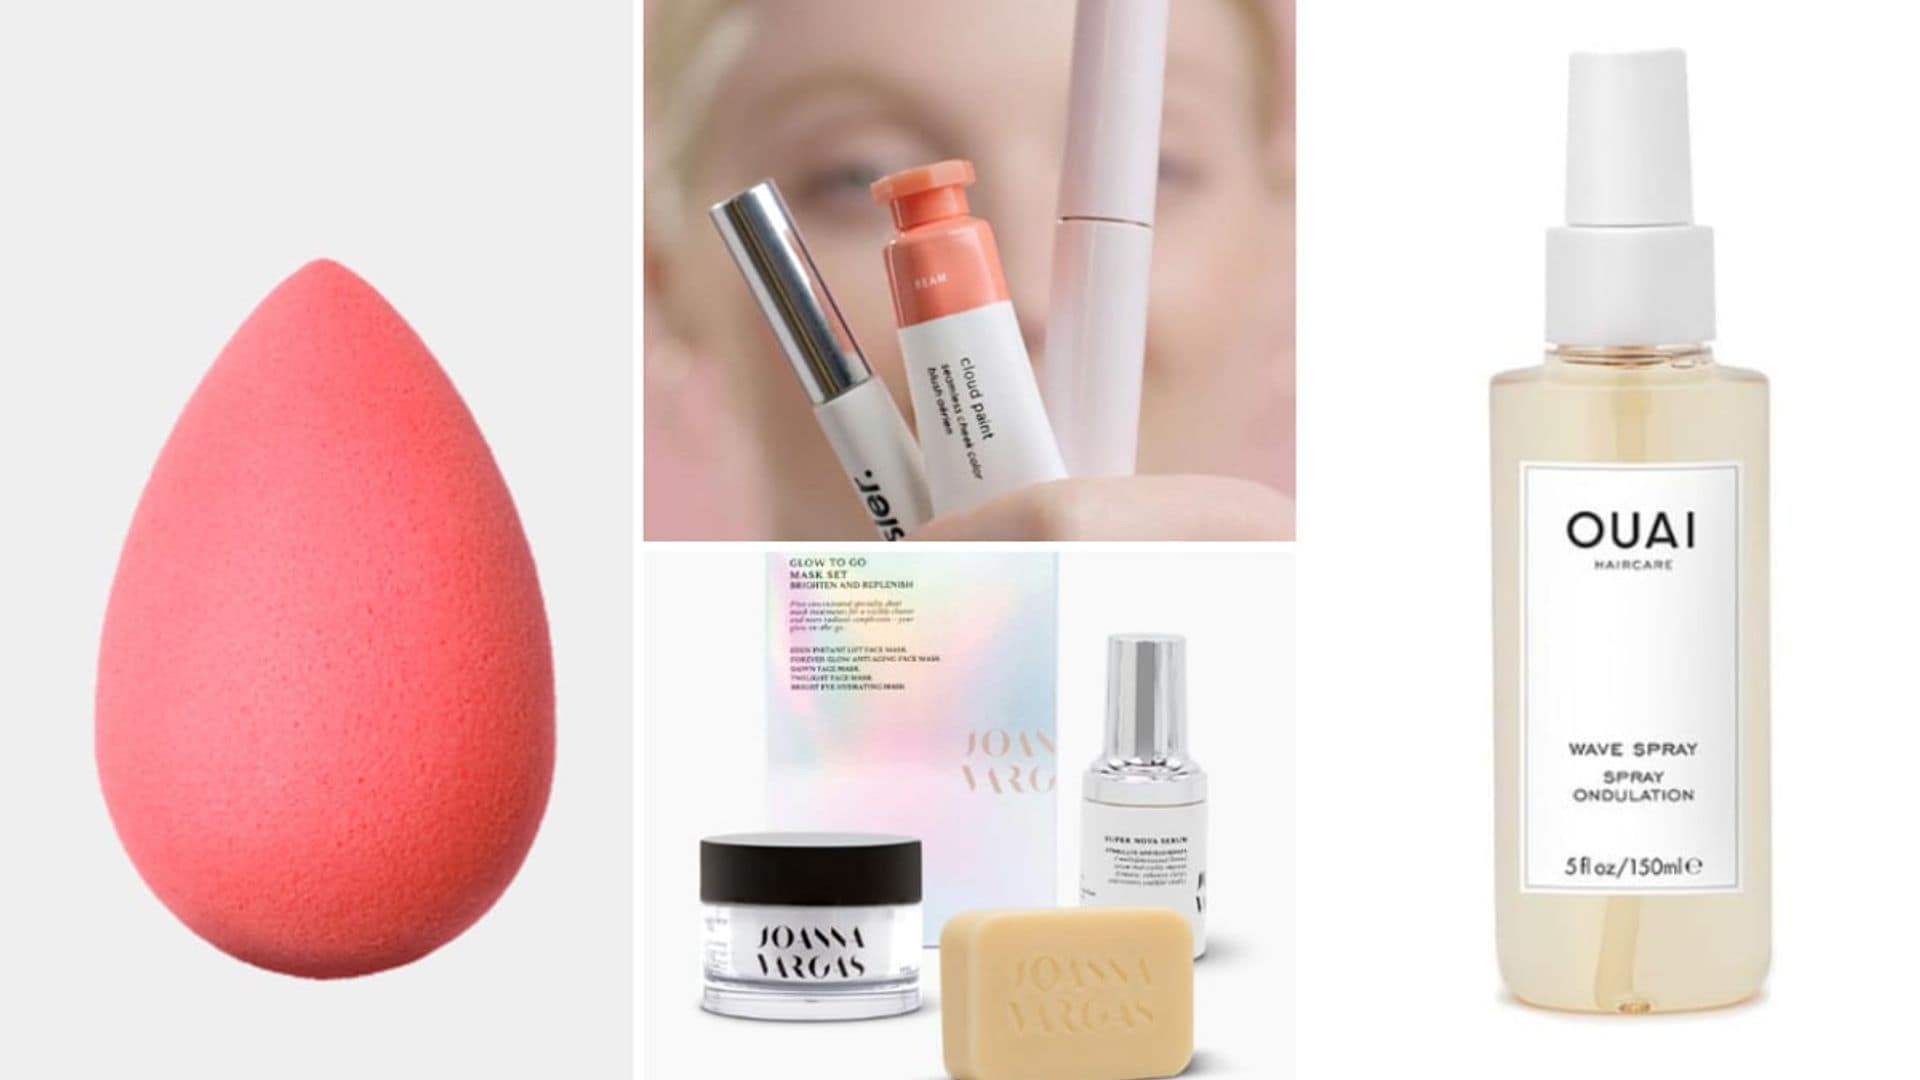 Girl Power! These favorited beauty brands are led by female entrepreneurs